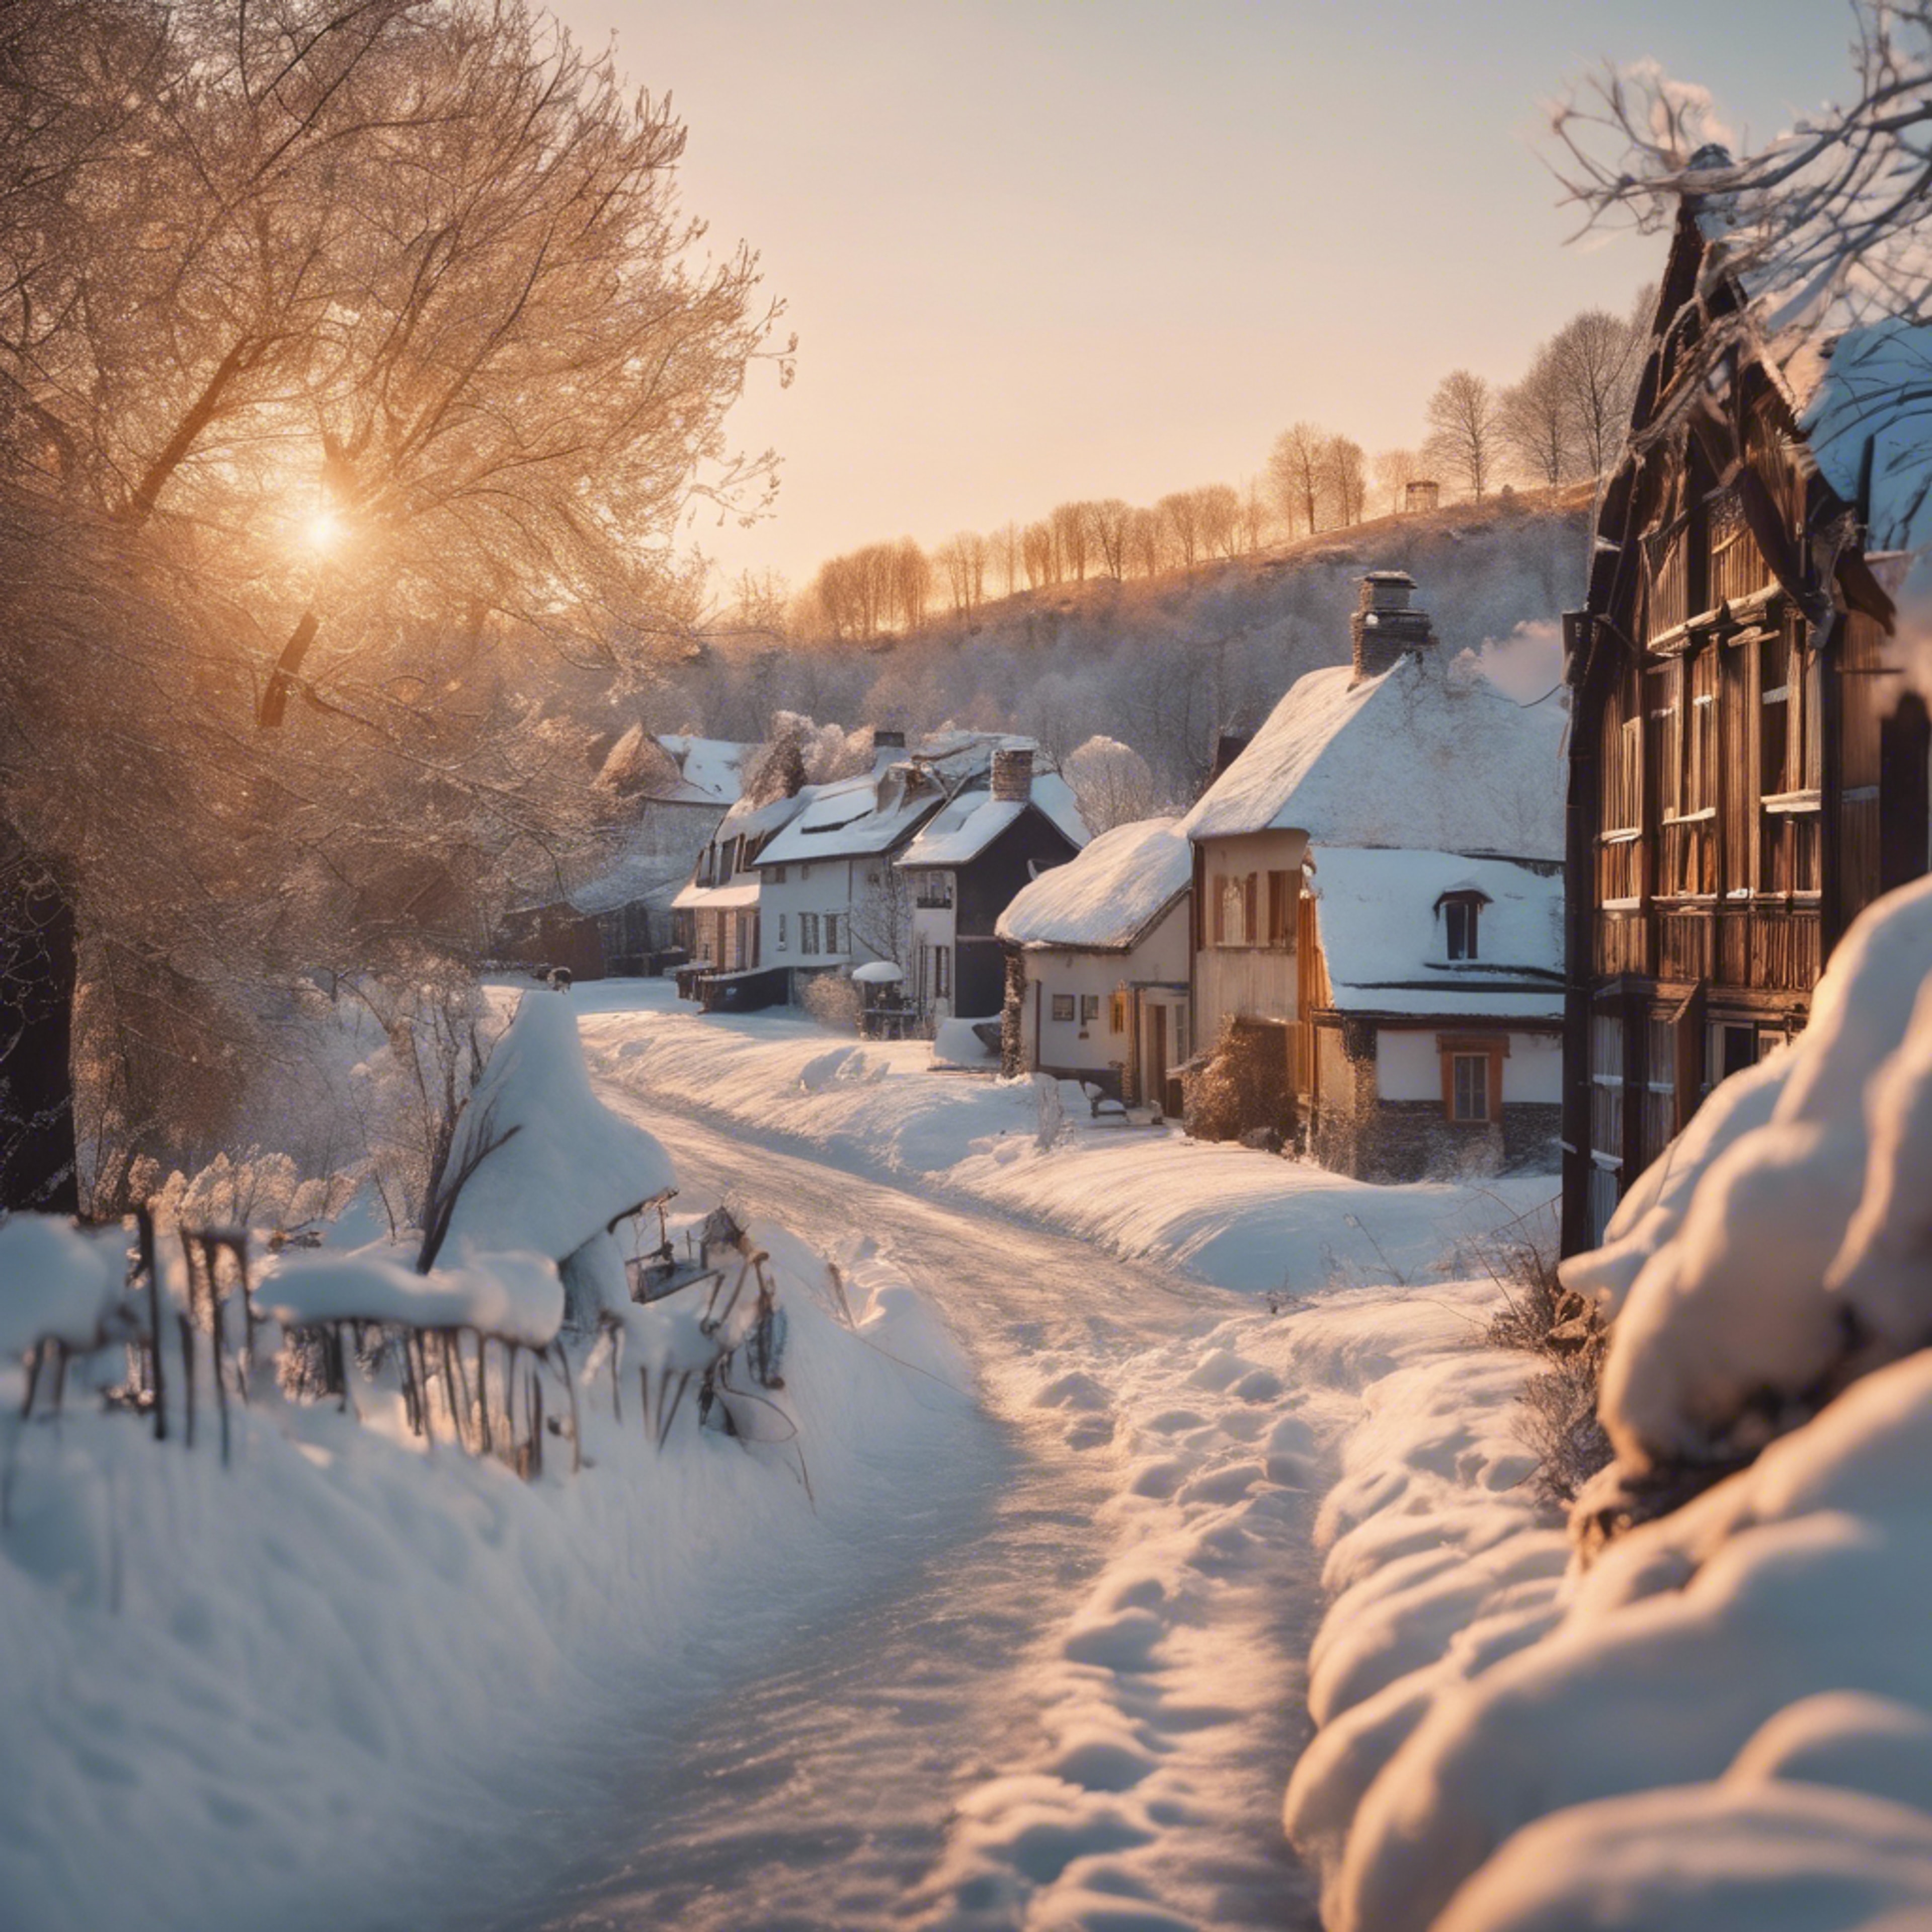 A snow-covered village scene bathed in the soft, golden glow of the setting sun. Wallpaper[95d4db54dffb469bbeda]